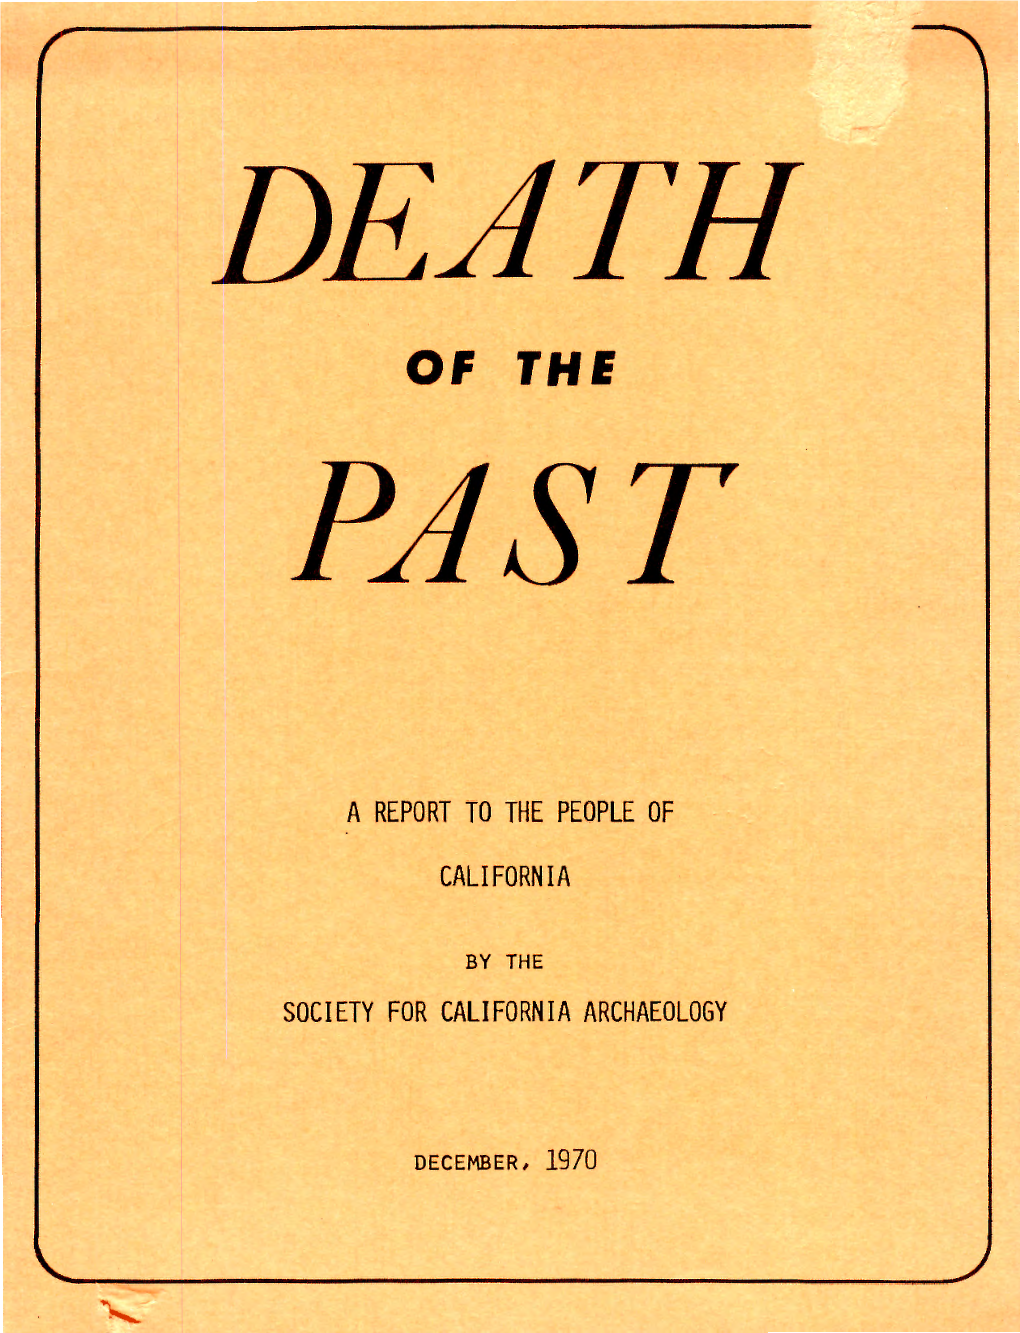 Death of the Past